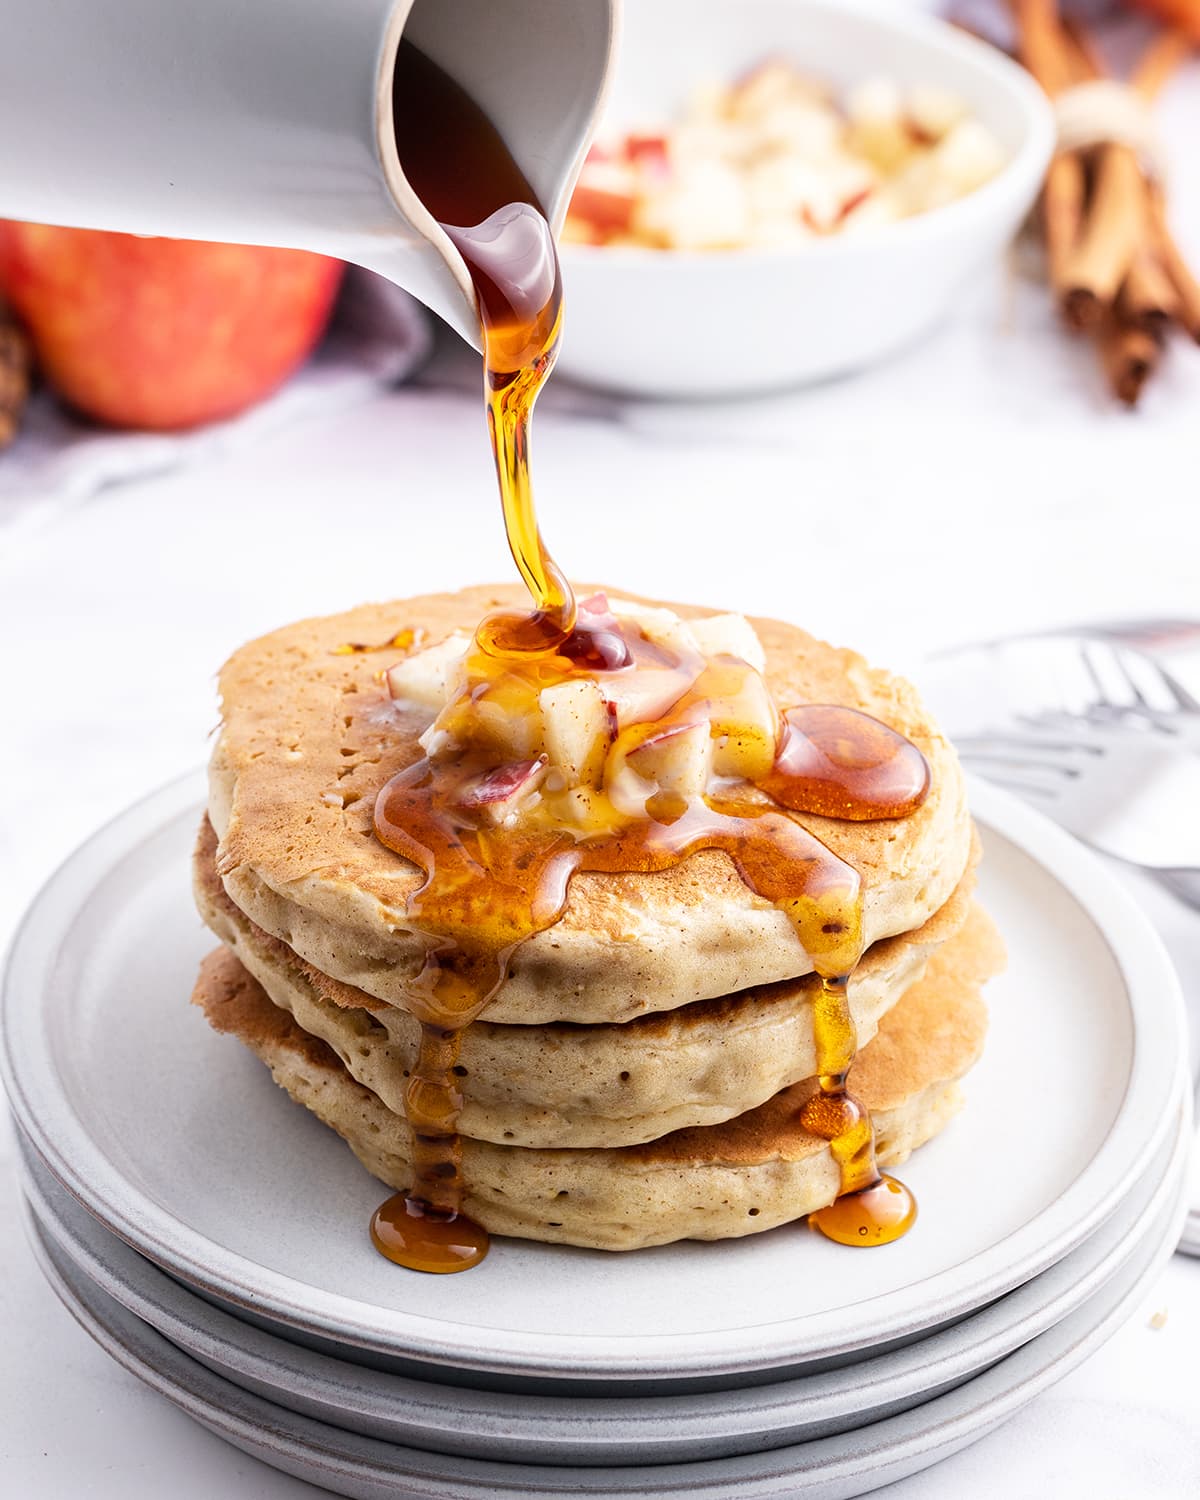 A stack of pancakes topped with diced apples and syrup is being poured over the top.